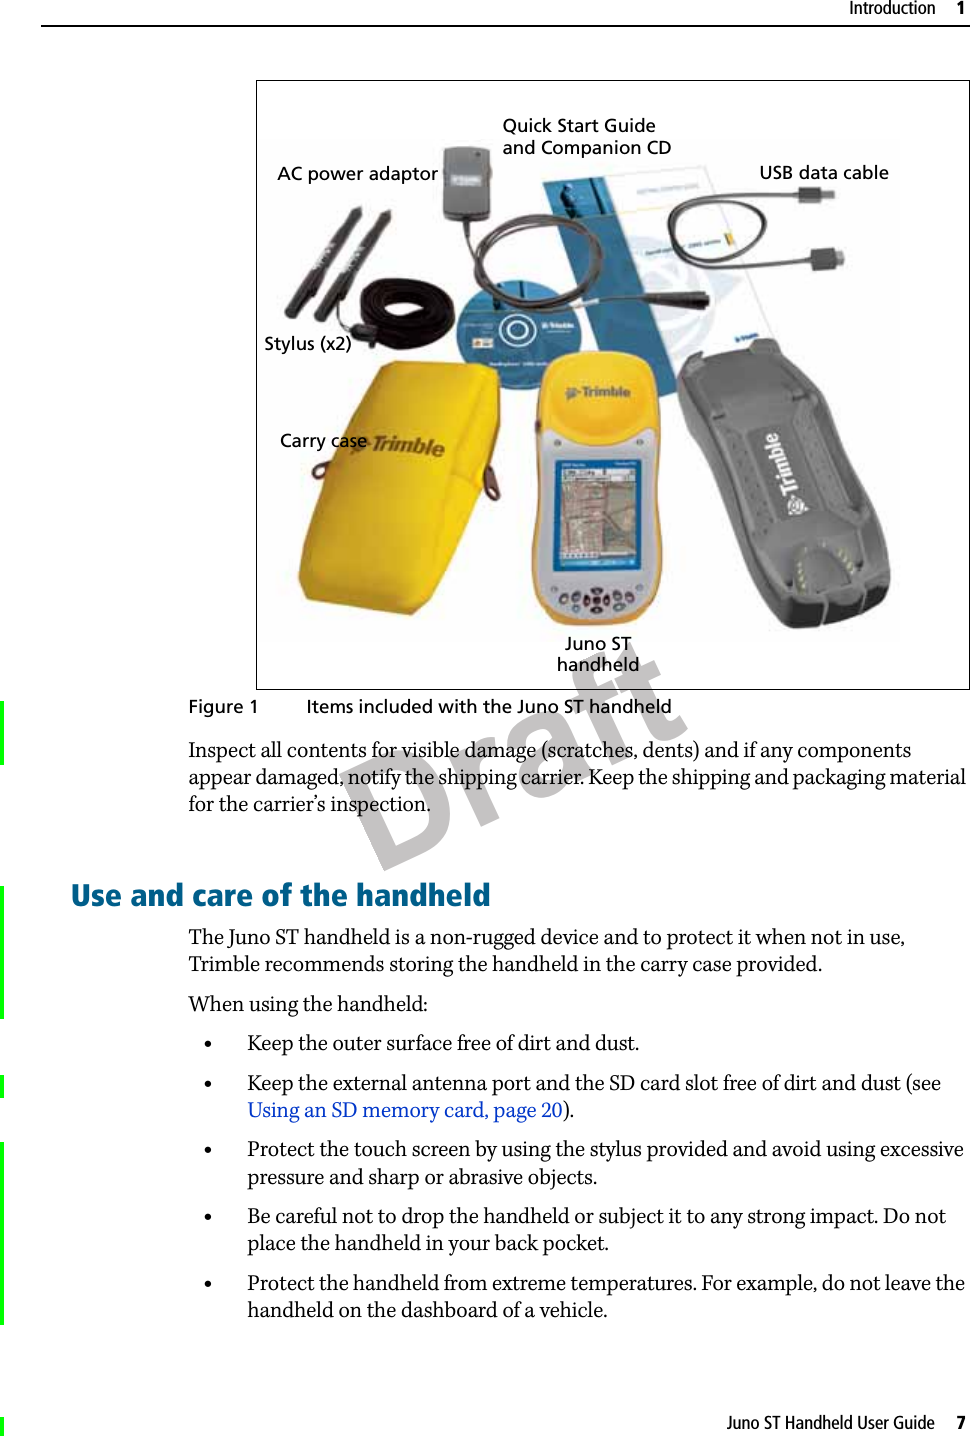 DraftJuno ST Handheld User Guide     7Introduction     1  Figure 1 Items included with the Juno ST handheldInspect all contents for visible damage (scratches, dents) and if any components appear damaged, notify the shipping carrier. Keep the shipping and packaging material for the carrier’s inspection.Use and care of the handheldThe Juno ST handheld is a non-rugged device and to protect it when not in use, Trimble recommends storing the handheld in the carry case provided.When using the handheld:•Keep the outer surface free of dirt and dust.•Keep the external antenna port and the SD card slot free of dirt and dust (see Using an SD memory card, page 20).•Protect the touch screen by using the stylus provided and avoid using excessive pressure and sharp or abrasive objects.•Be careful not to drop the handheld or subject it to any strong impact. Do not place the handheld in your back pocket.•Protect the handheld from extreme temperatures. For example, do not leave the handheld on the dashboard of a vehicle.Juno STCarry caseUSB data cableQuick Start GuidehandheldStylus (x2)AC power adaptorand Companion CD